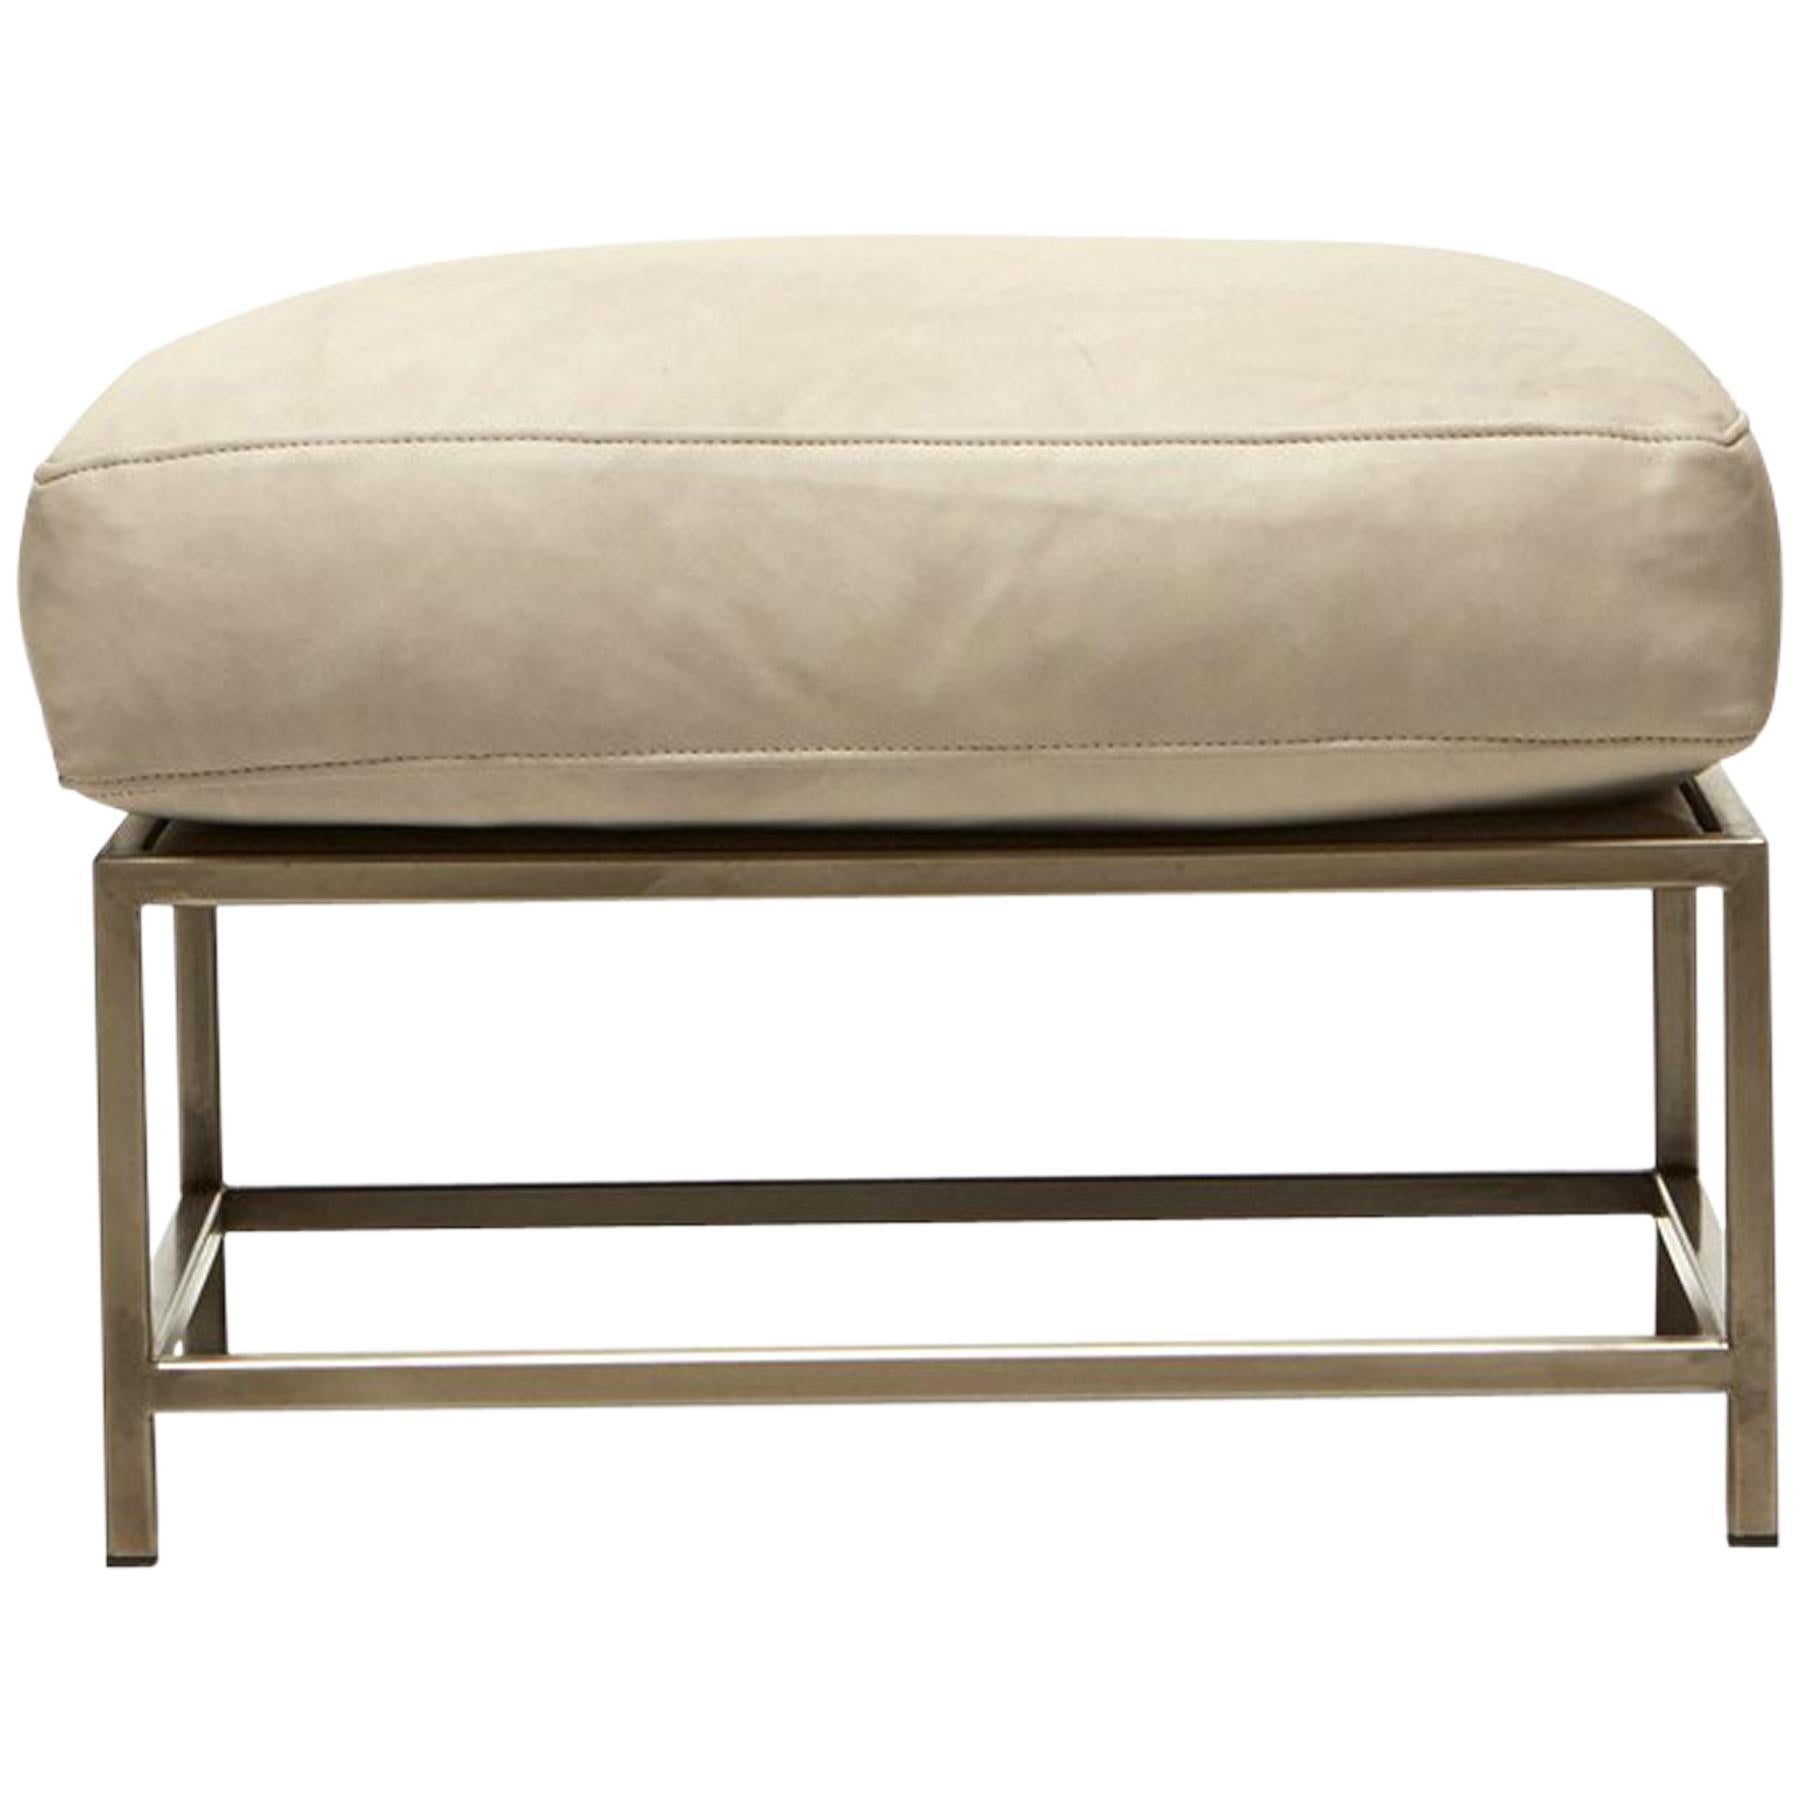 Stone Leather and Antique Nickel Ottoman